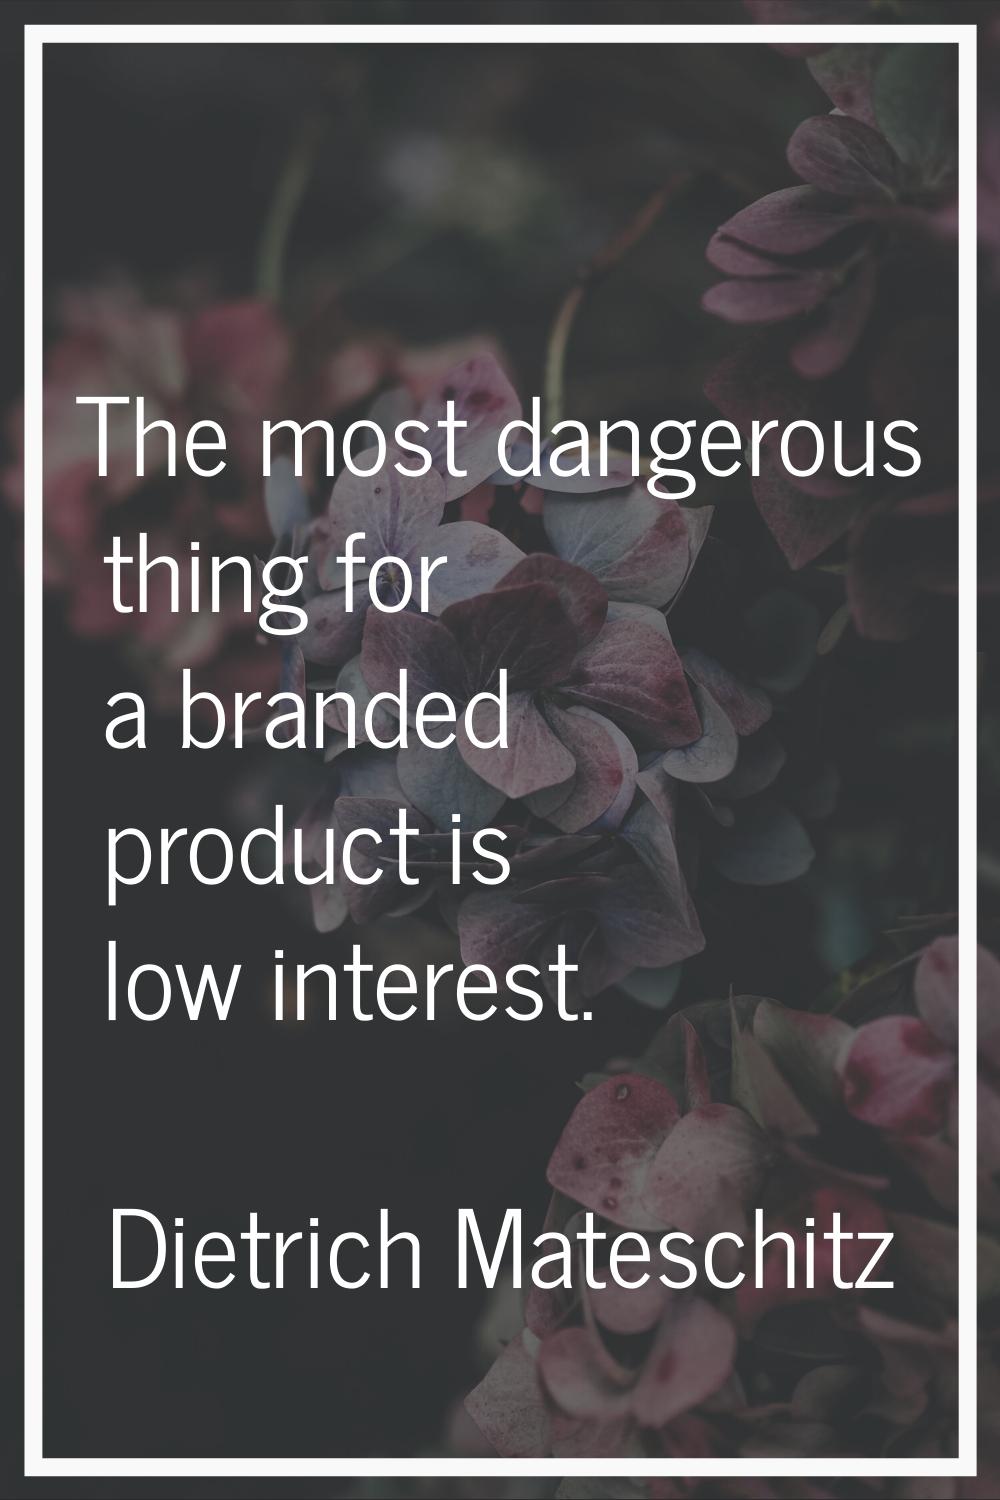 The most dangerous thing for a branded product is low interest.